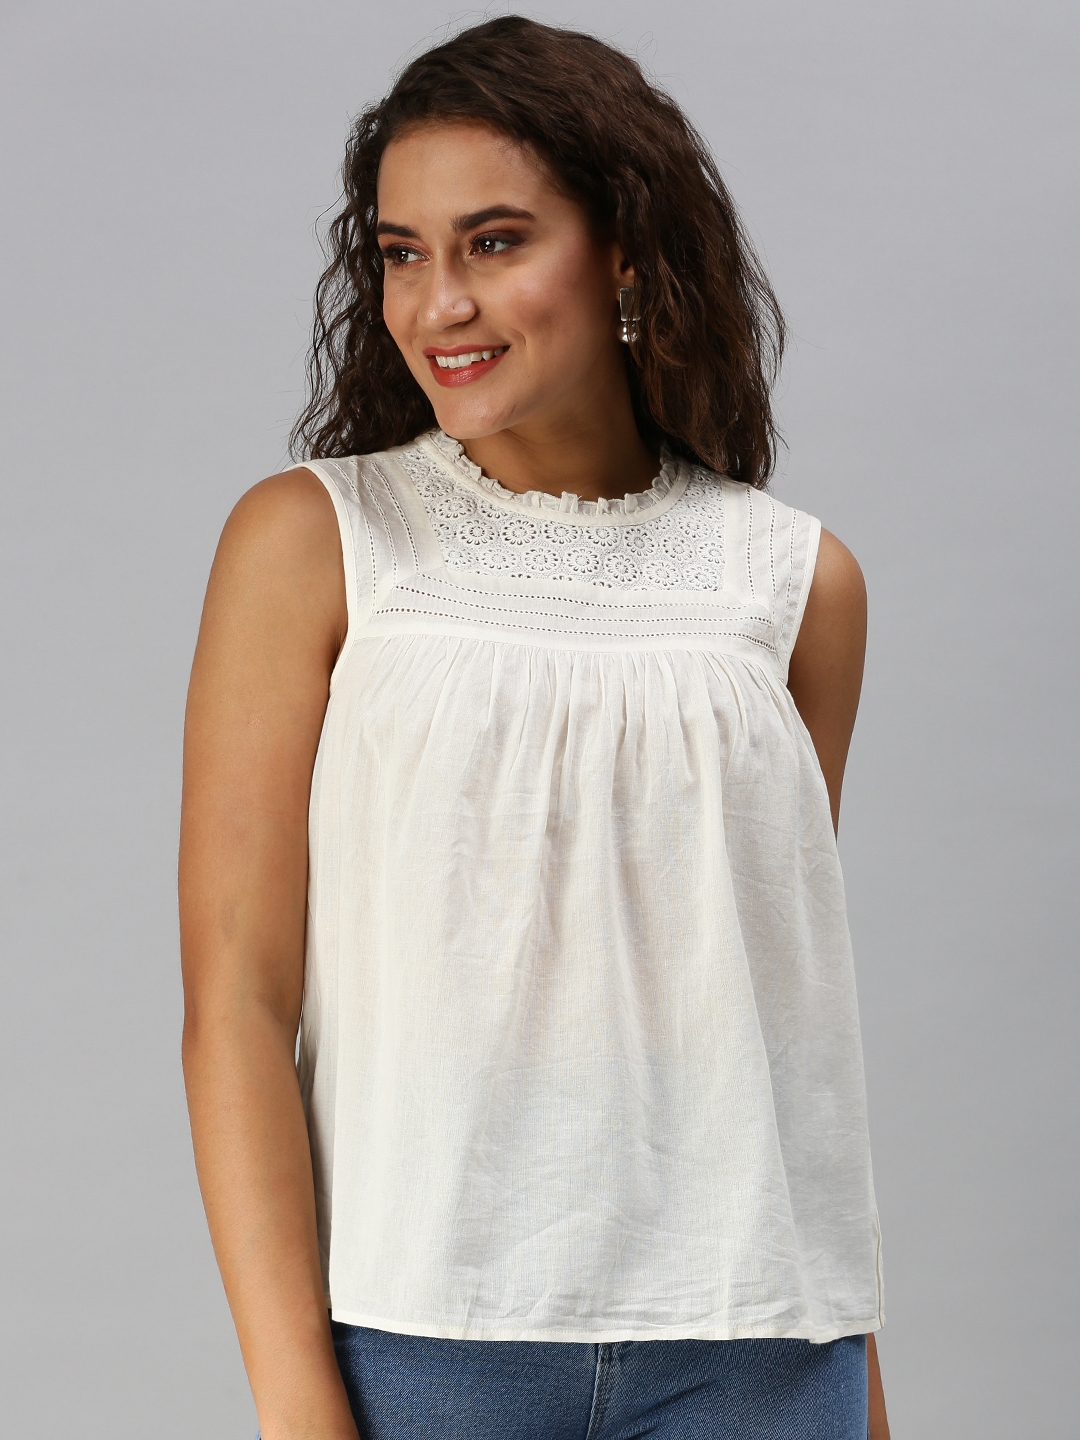 Women's White Viscose Solid Tops